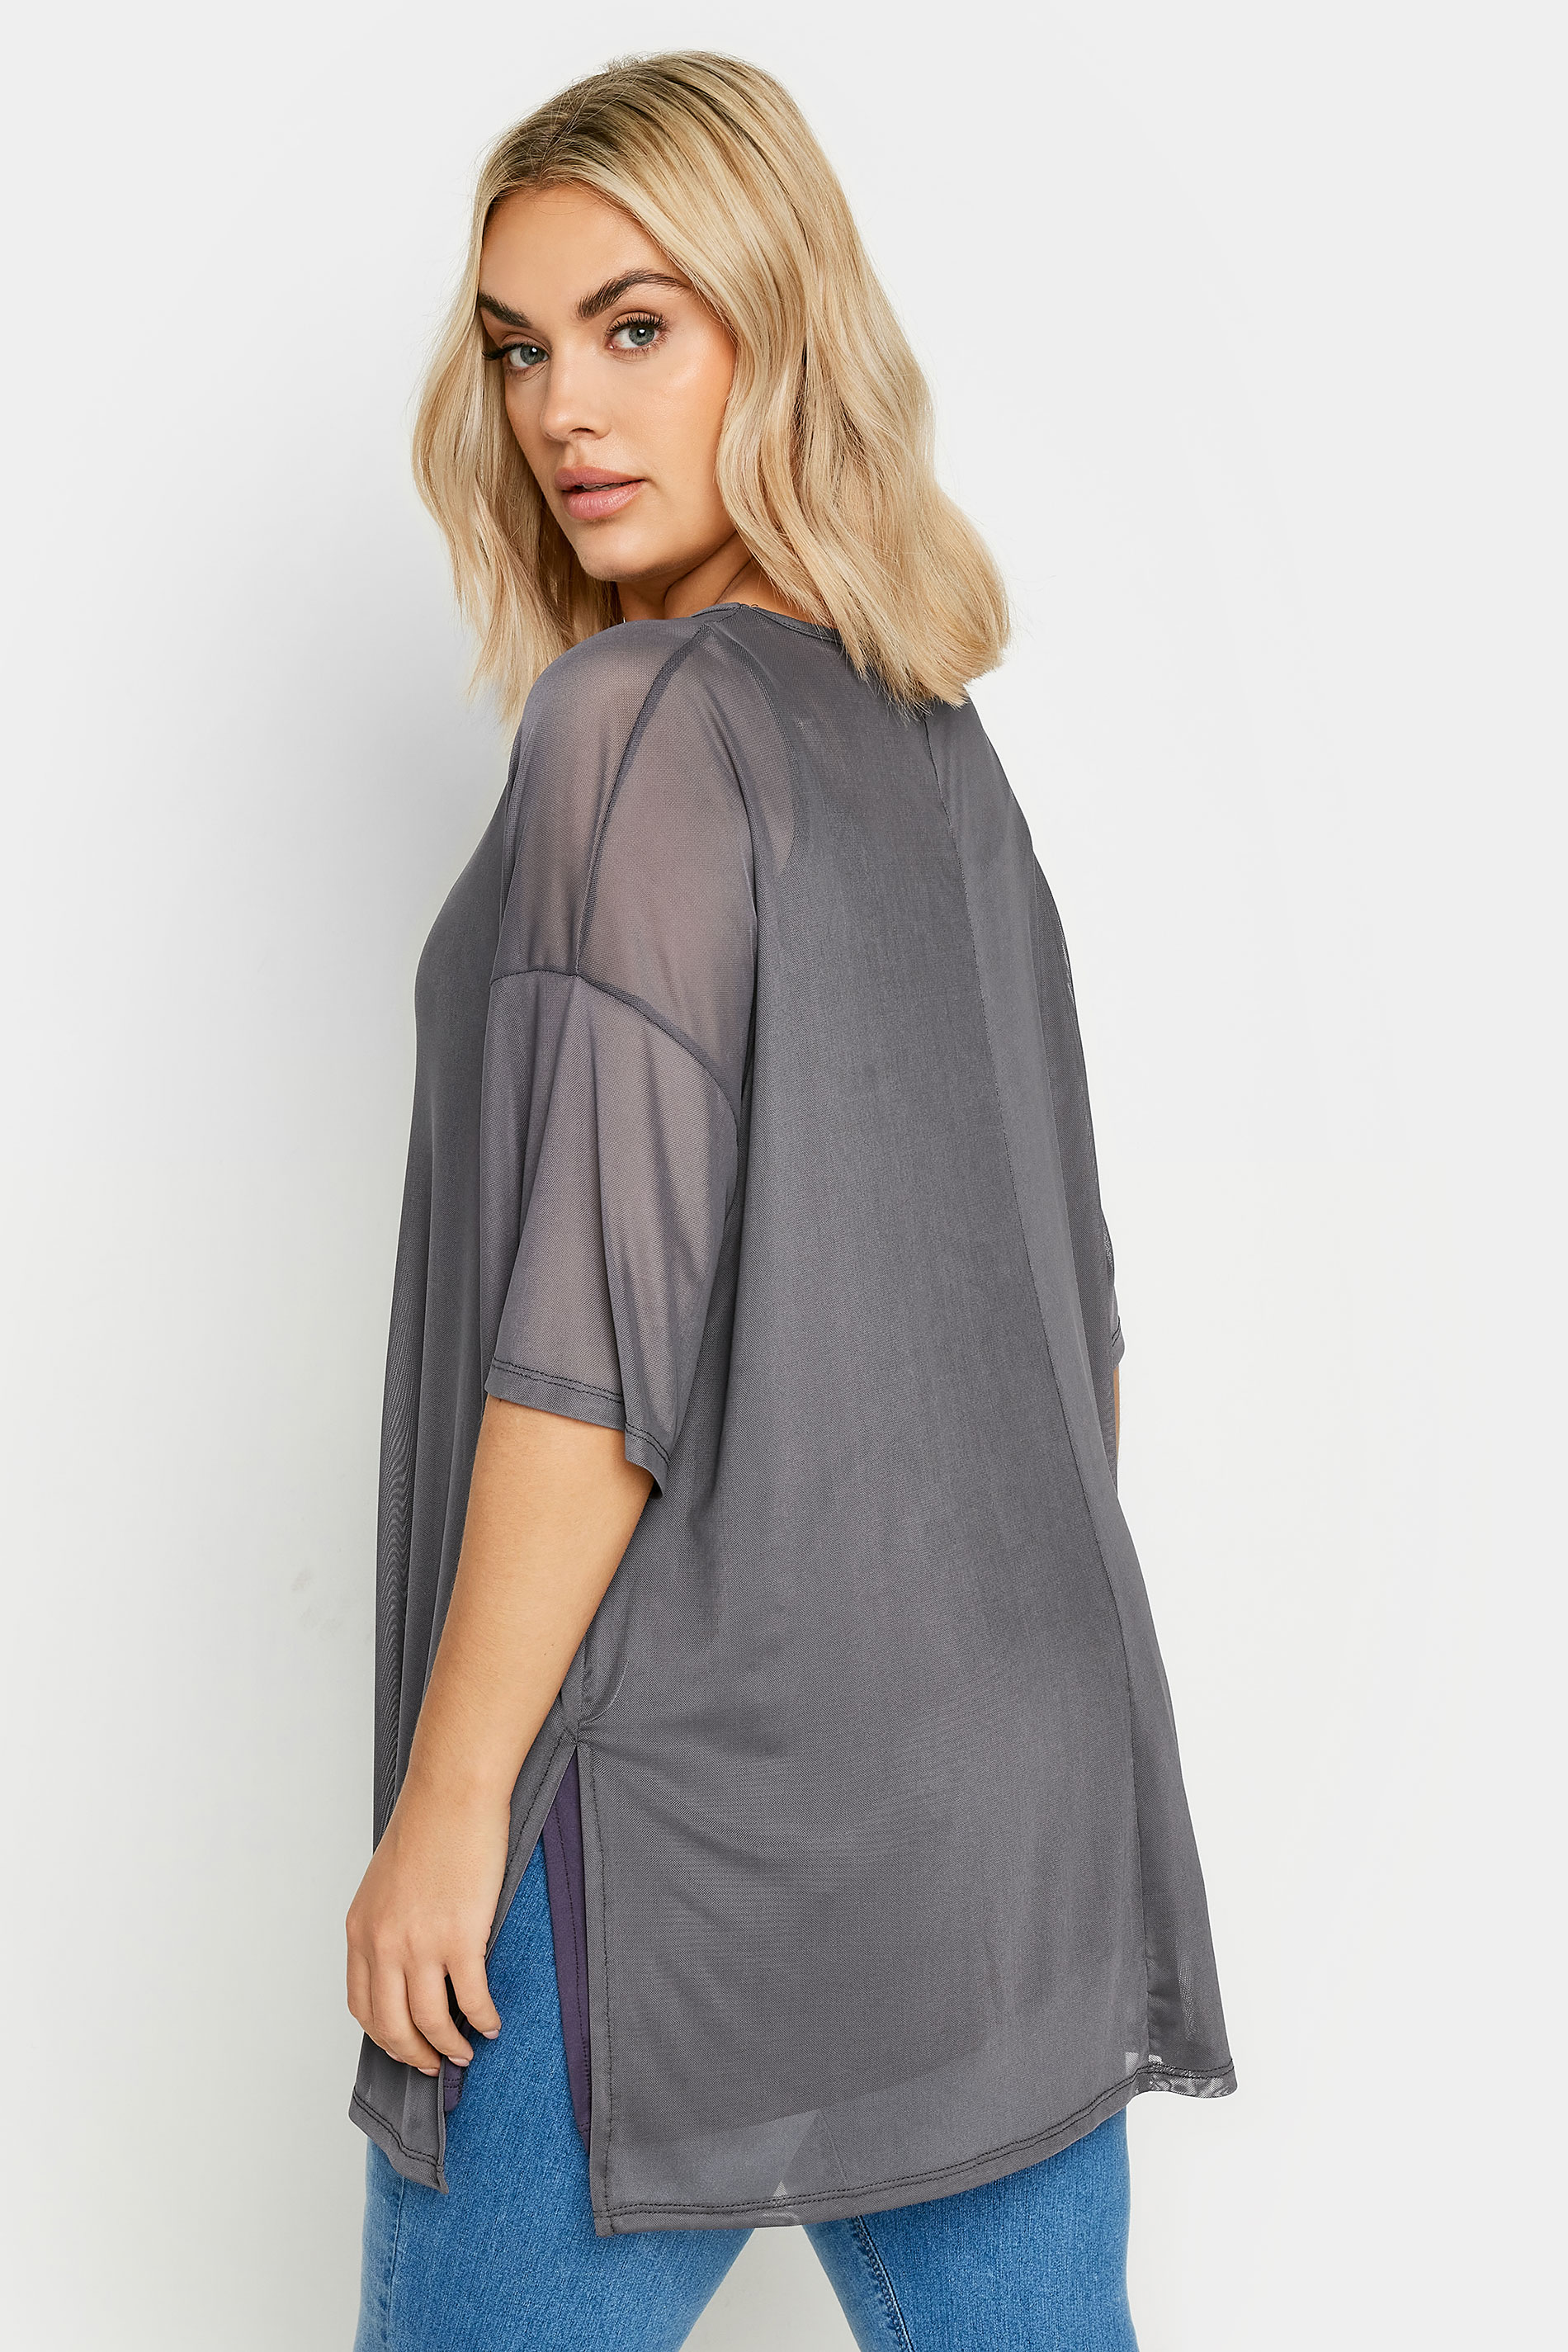 YOURS Plus Size Charcoal Grey Oversized Mesh Top | Yours Clothing 3